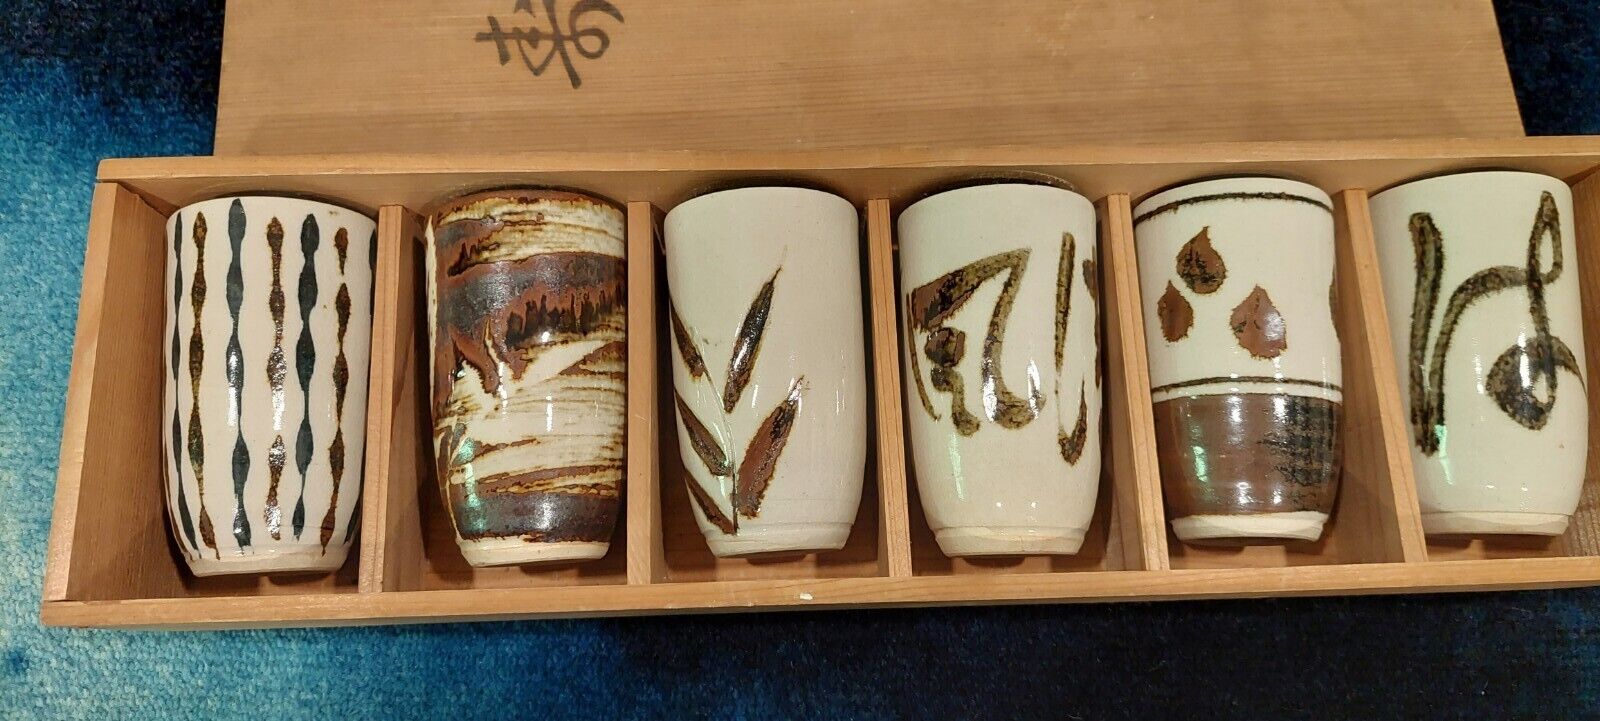 OMC Set of 6 VINTAGE Japanese Tea Cups by Otagiri Mercantile Company-NEW- in box